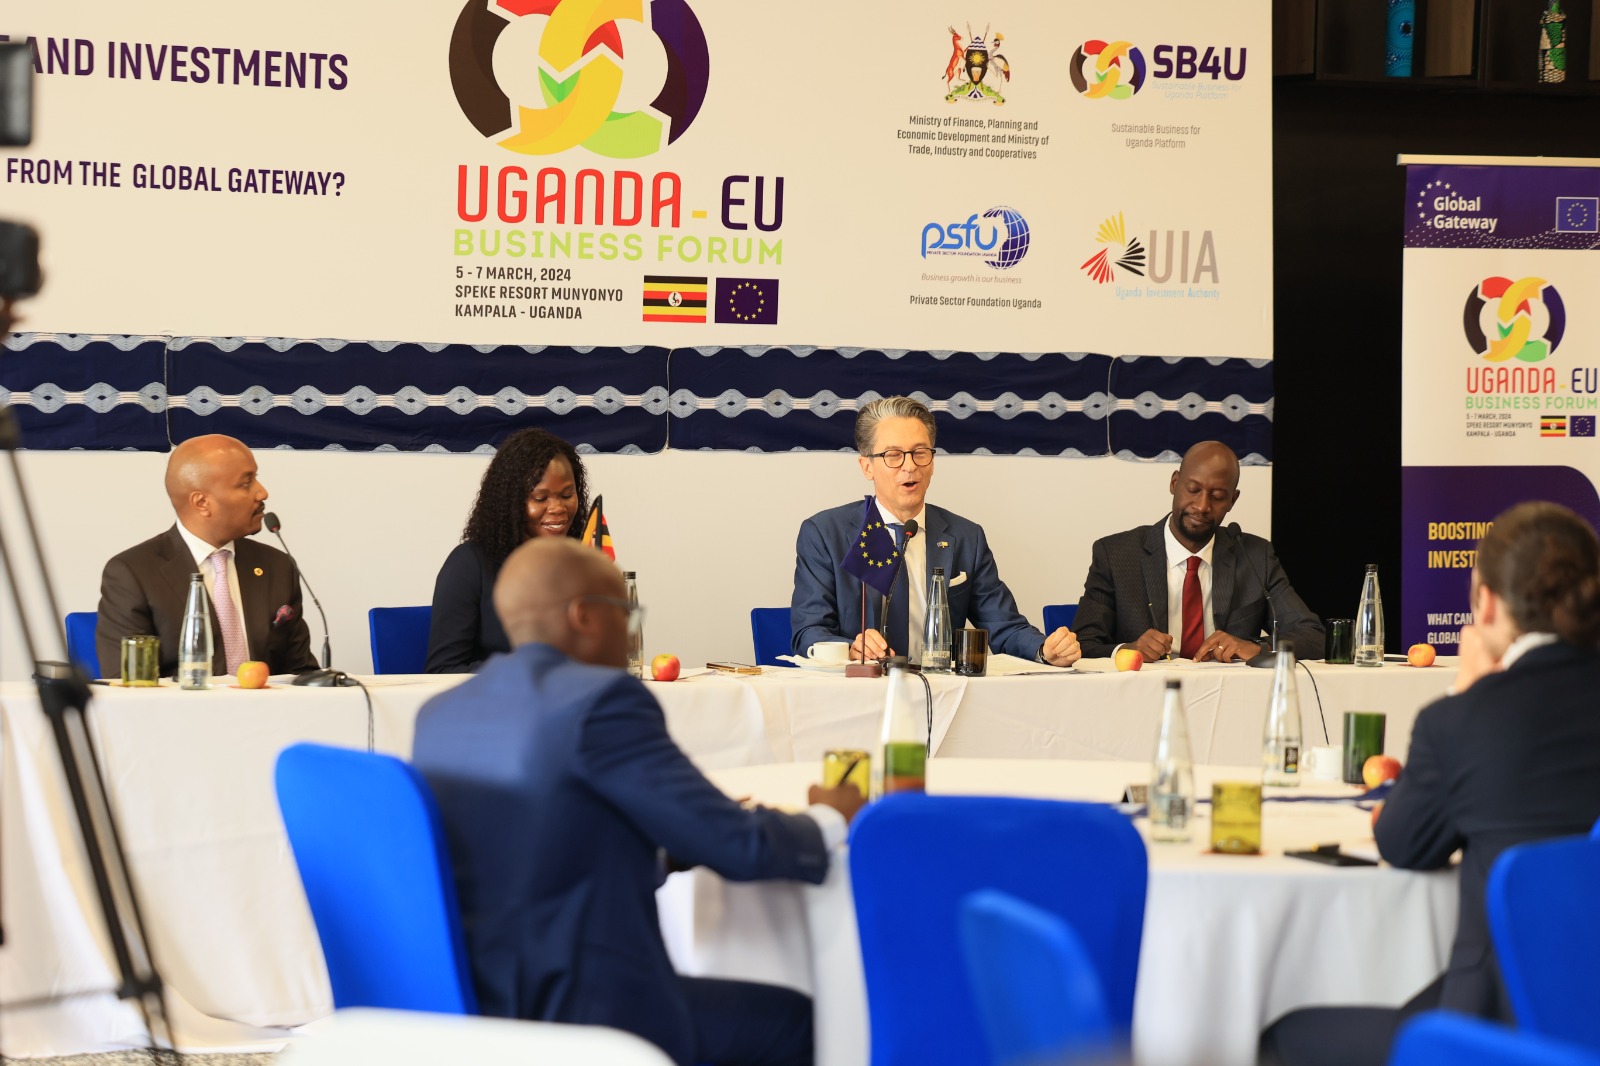 Uganda, EU hope to use forthcoming business forum to catapult their trade volumes